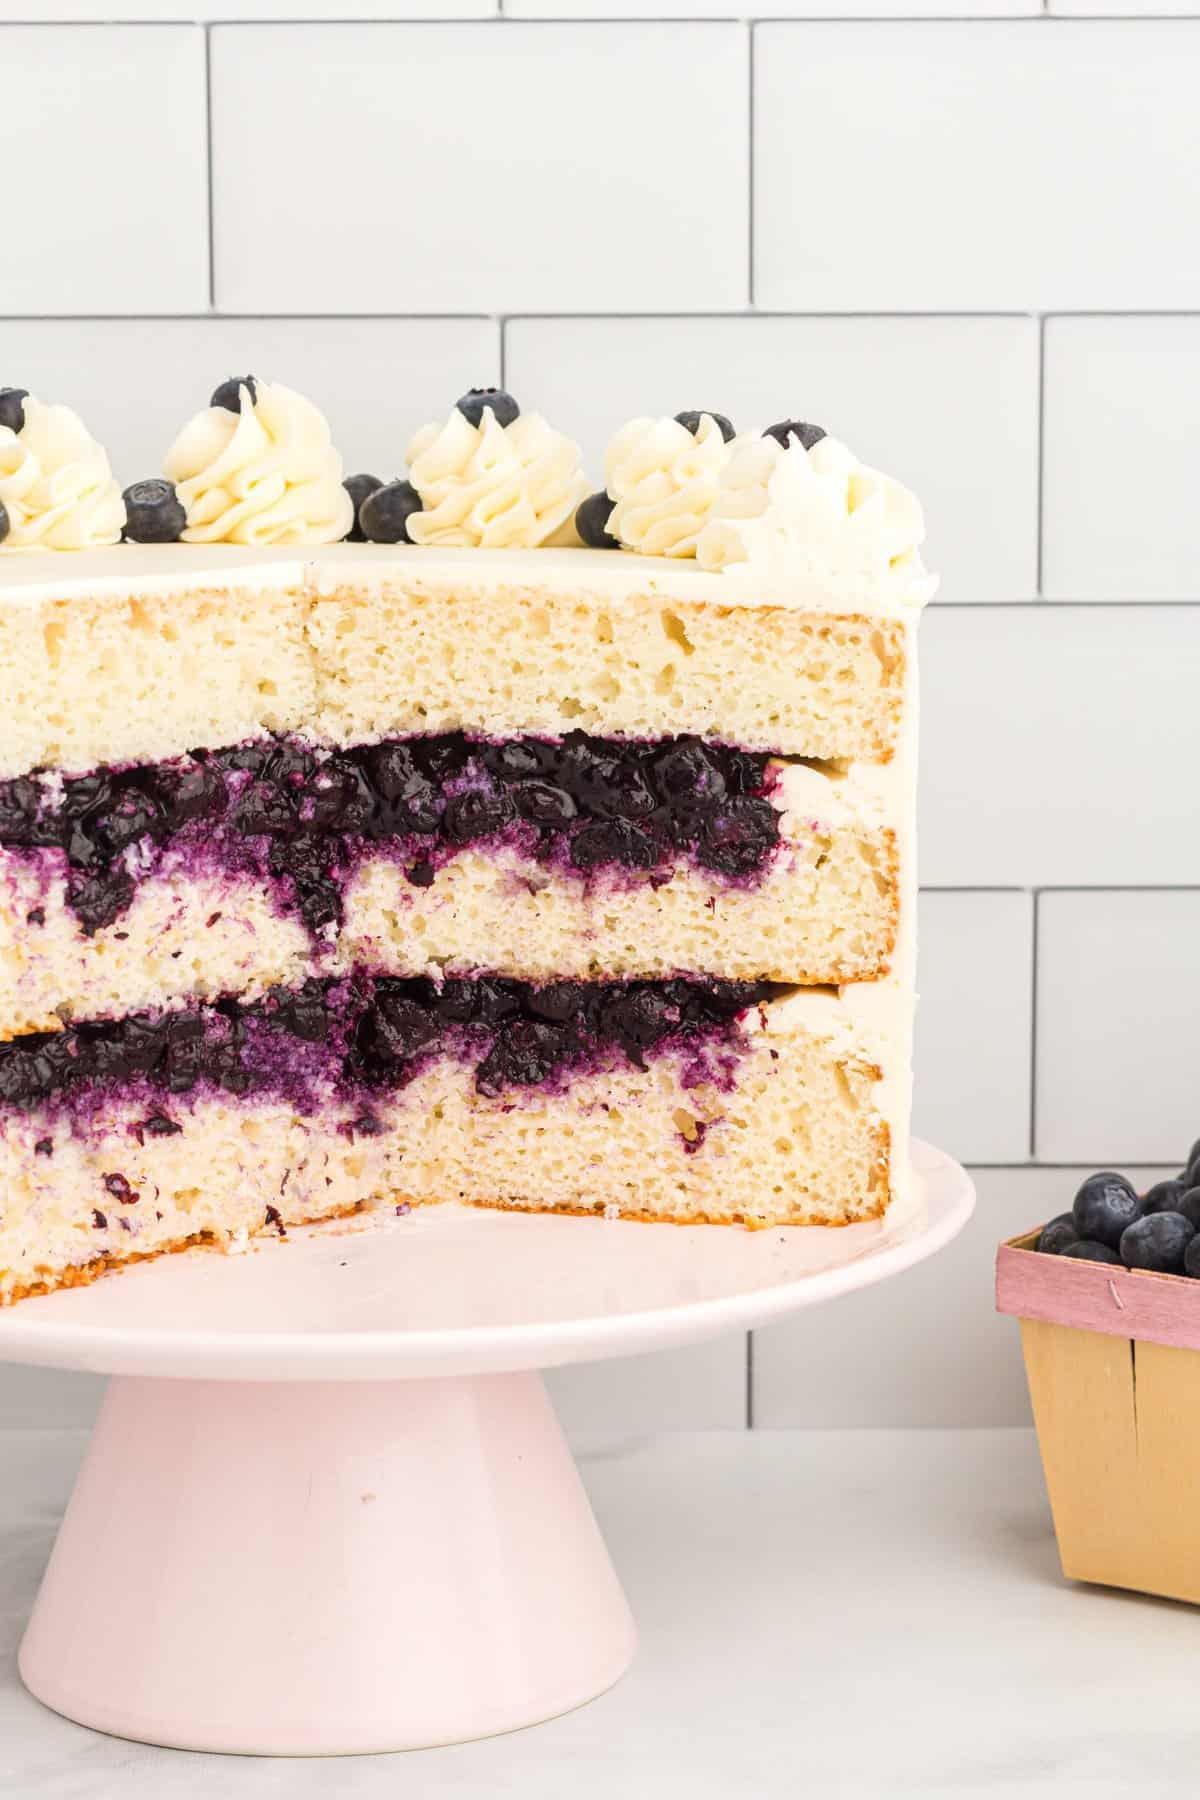 Whole cake on pink stand with slices removed to show the blueberry filling. 